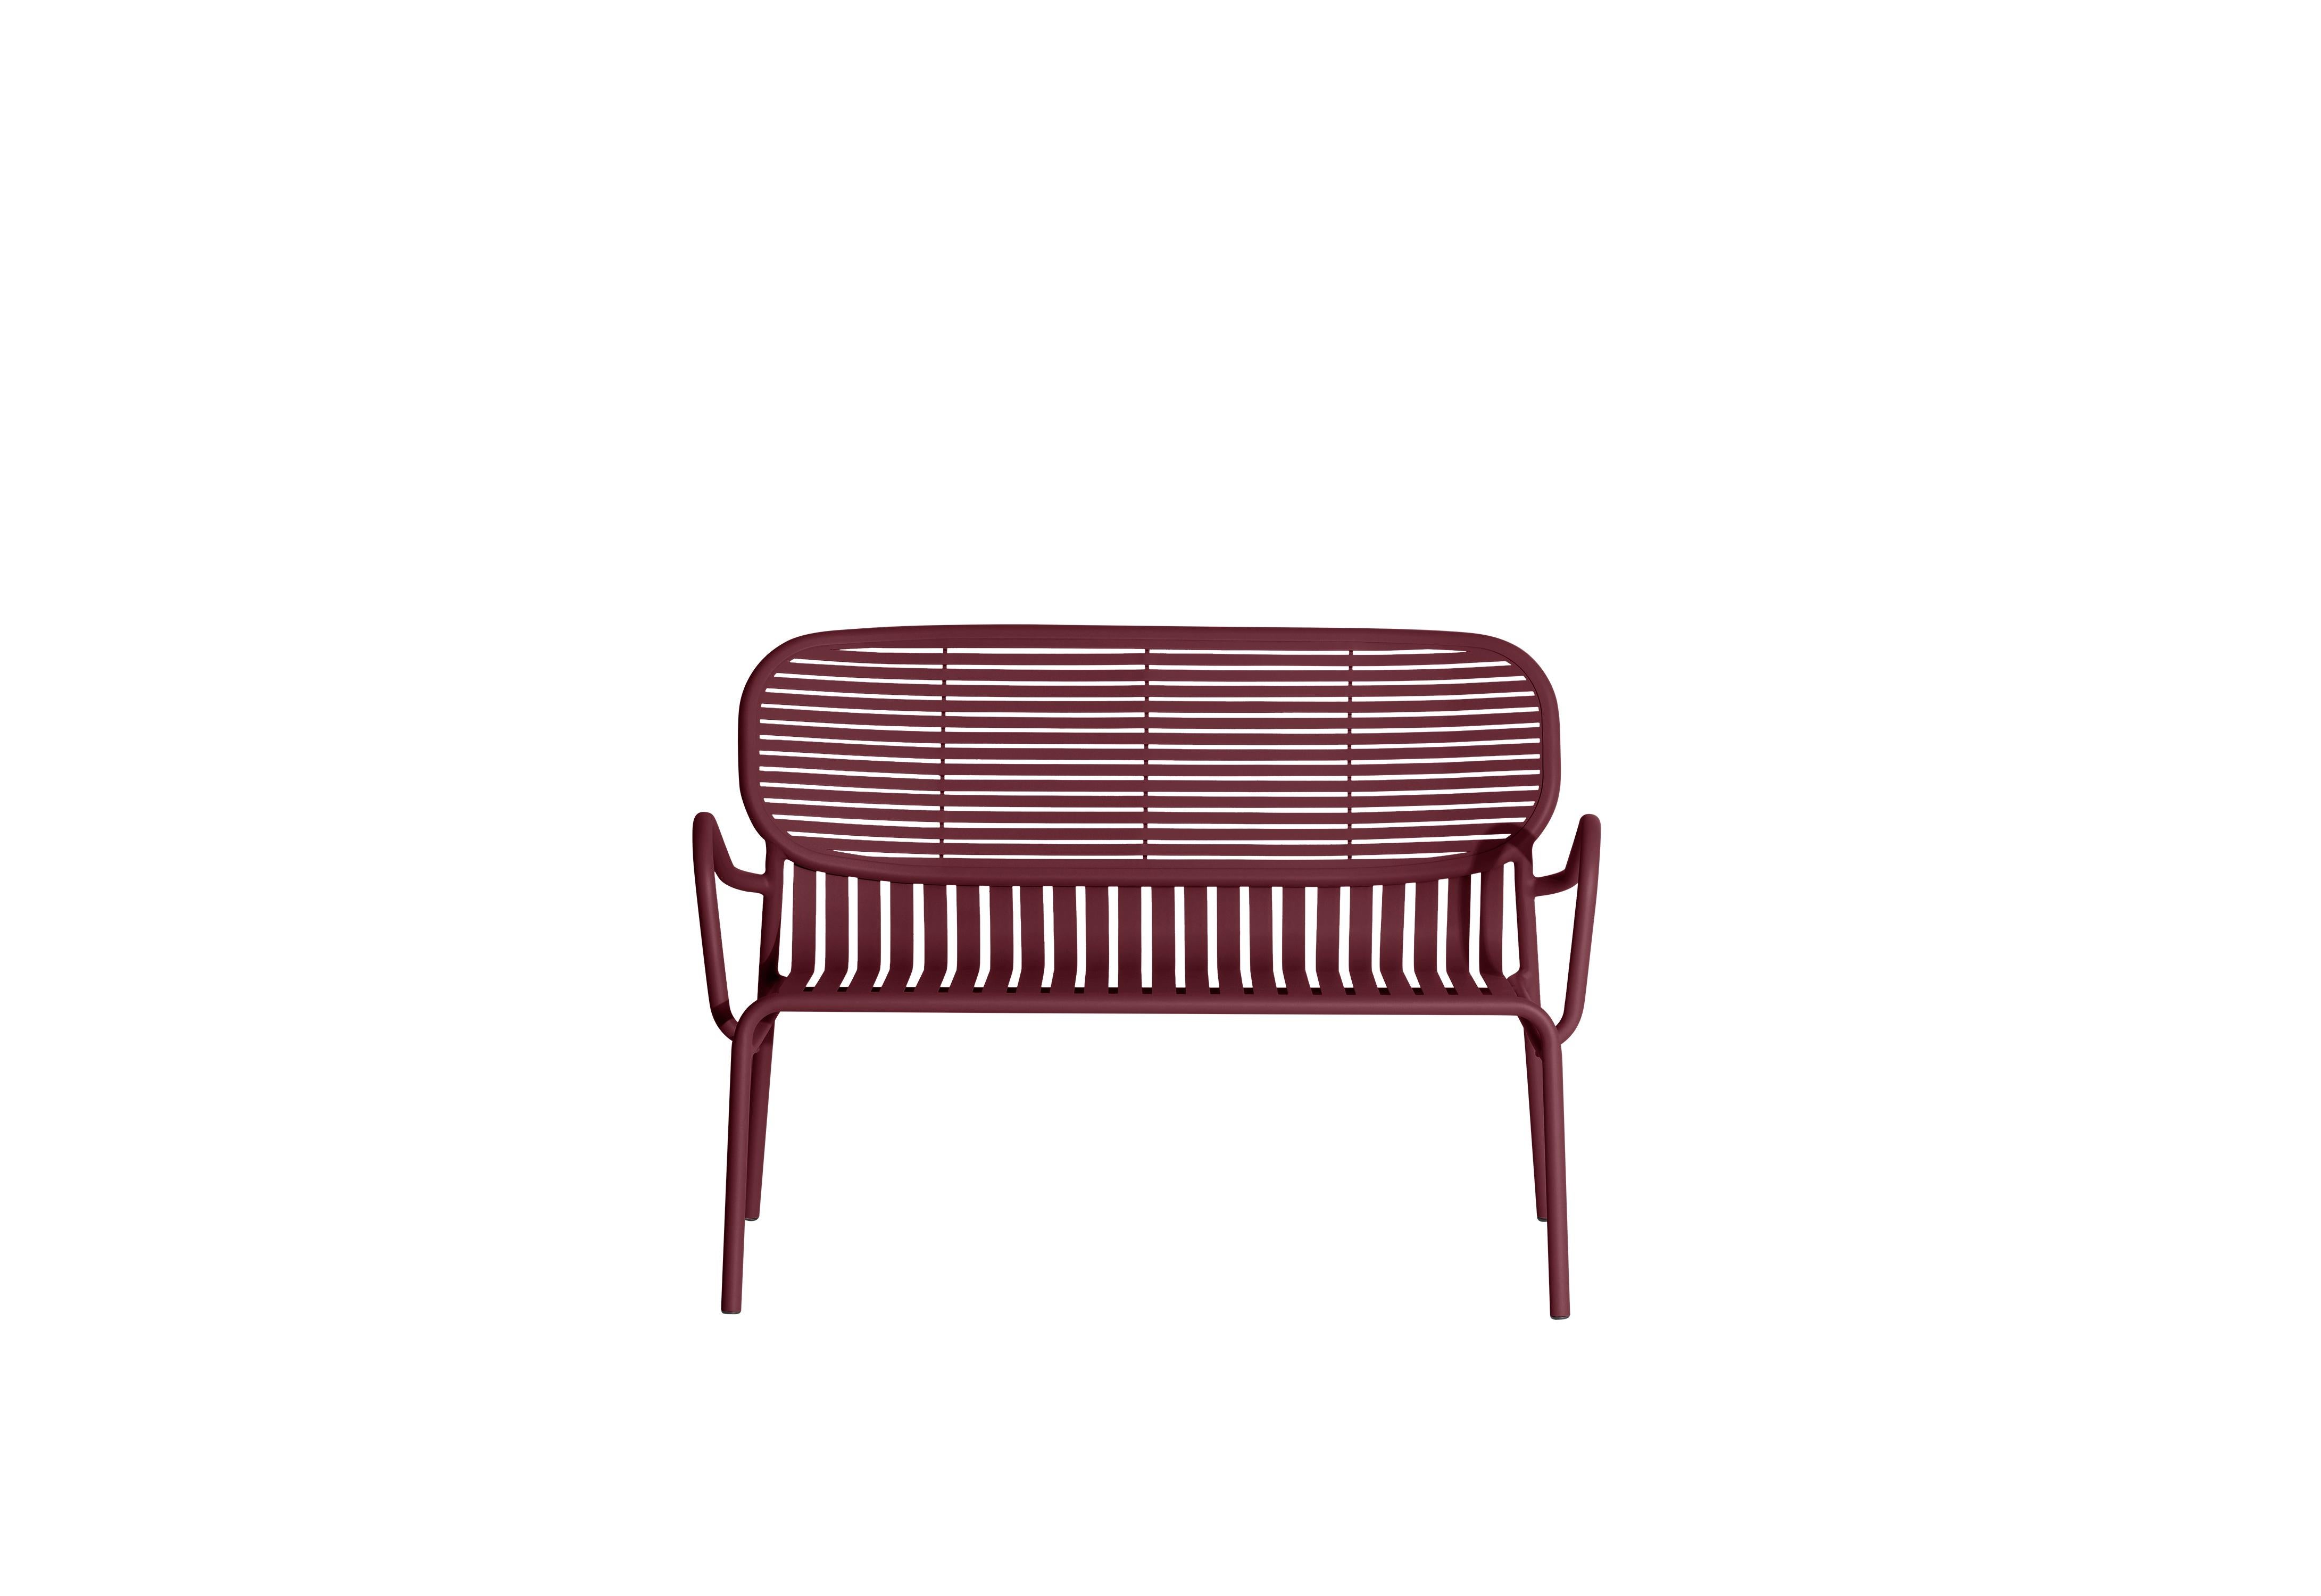 Petite Friture Week-End Sofa in Burgundy Aluminium by Studio BrichetZiegler, 2017

The week-end collection is a full range of outdoor furniture, in aluminium grained epoxy paint, matt finish, that includes 18 functions and 8 colours for the retail